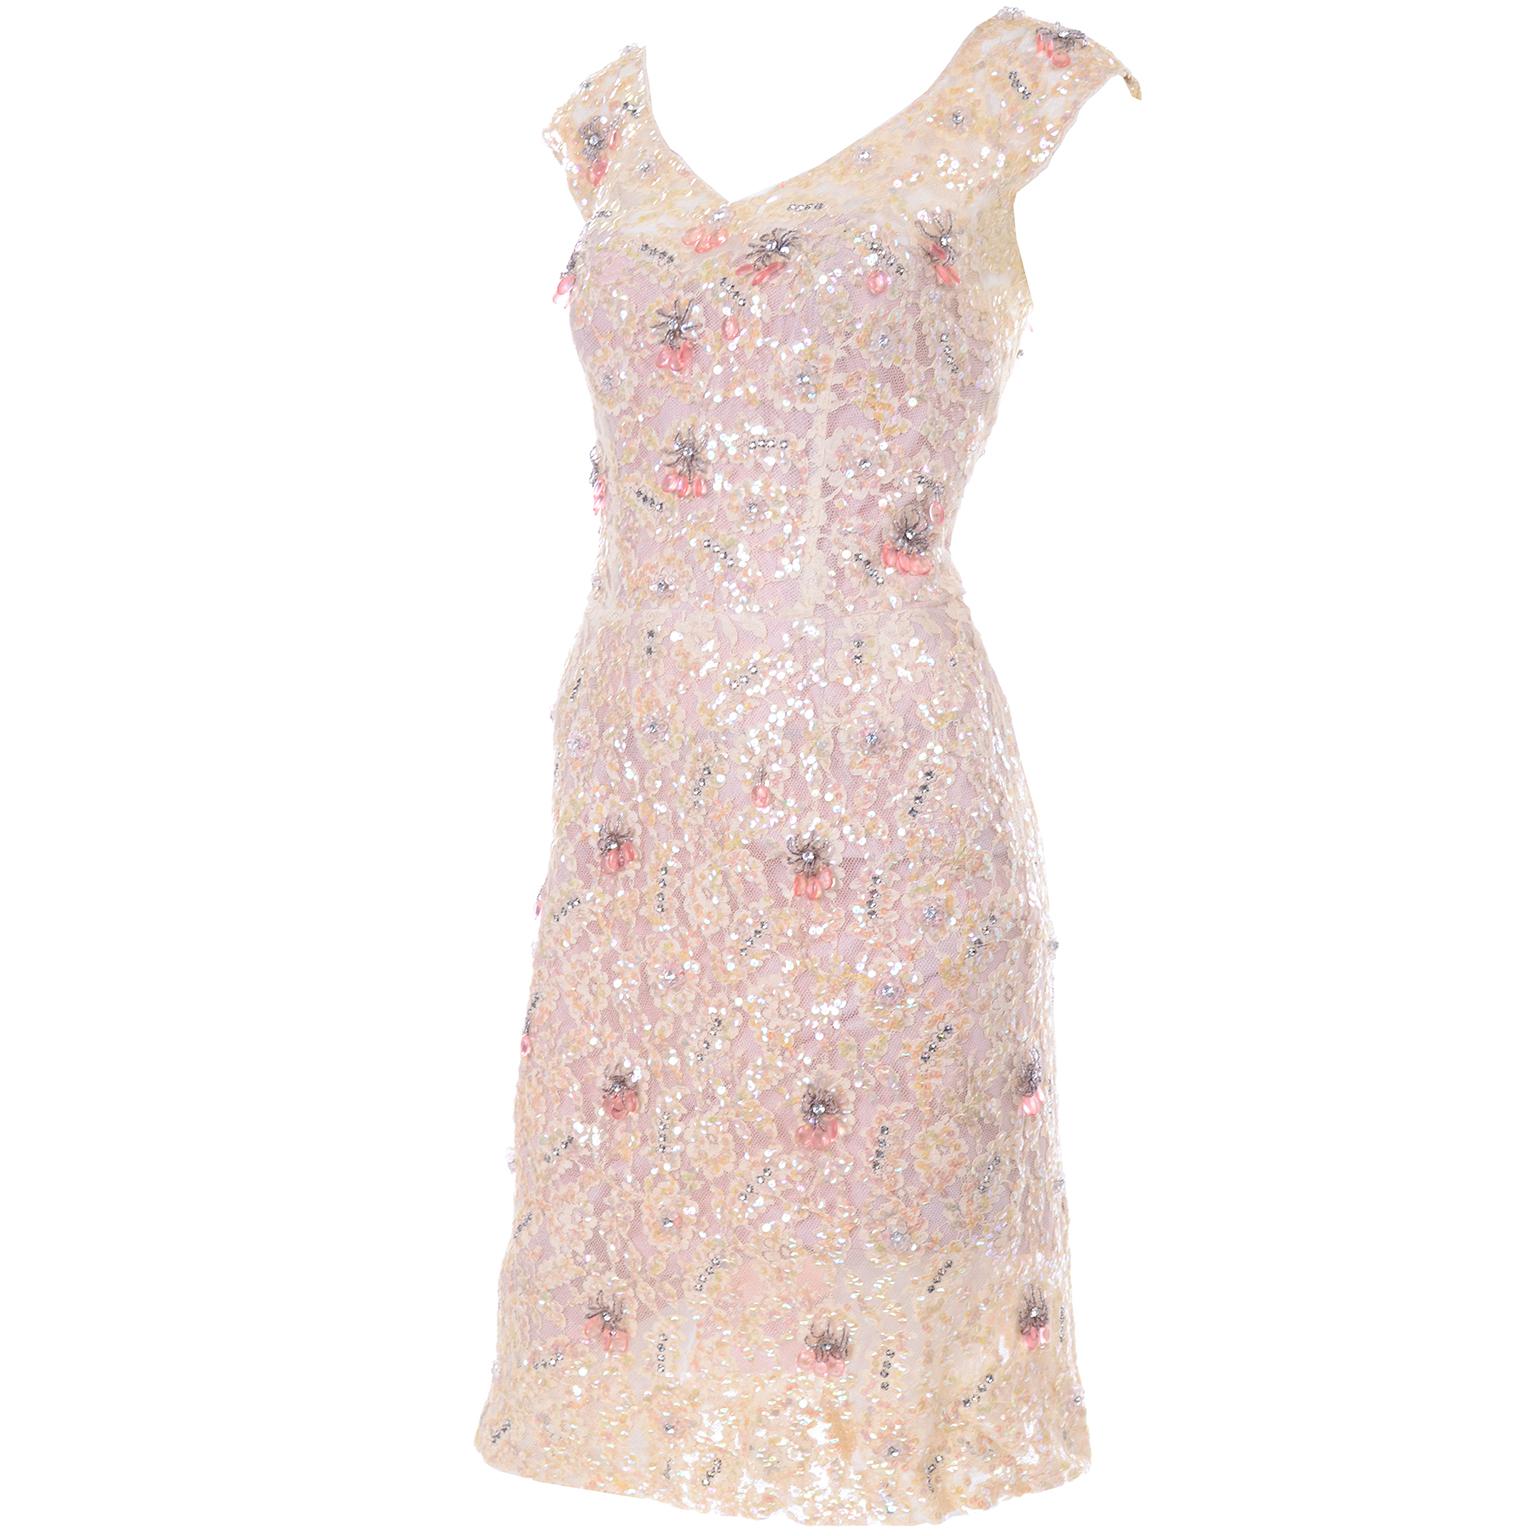 This is a stunning 1960's Harvey Berin wiggle dress with a pink satin lined sheer lace dress with an illusion bodice! The dress was designed by Karen Stark and has an outer dress that is covered with iridescent sequins forming flowers. There are